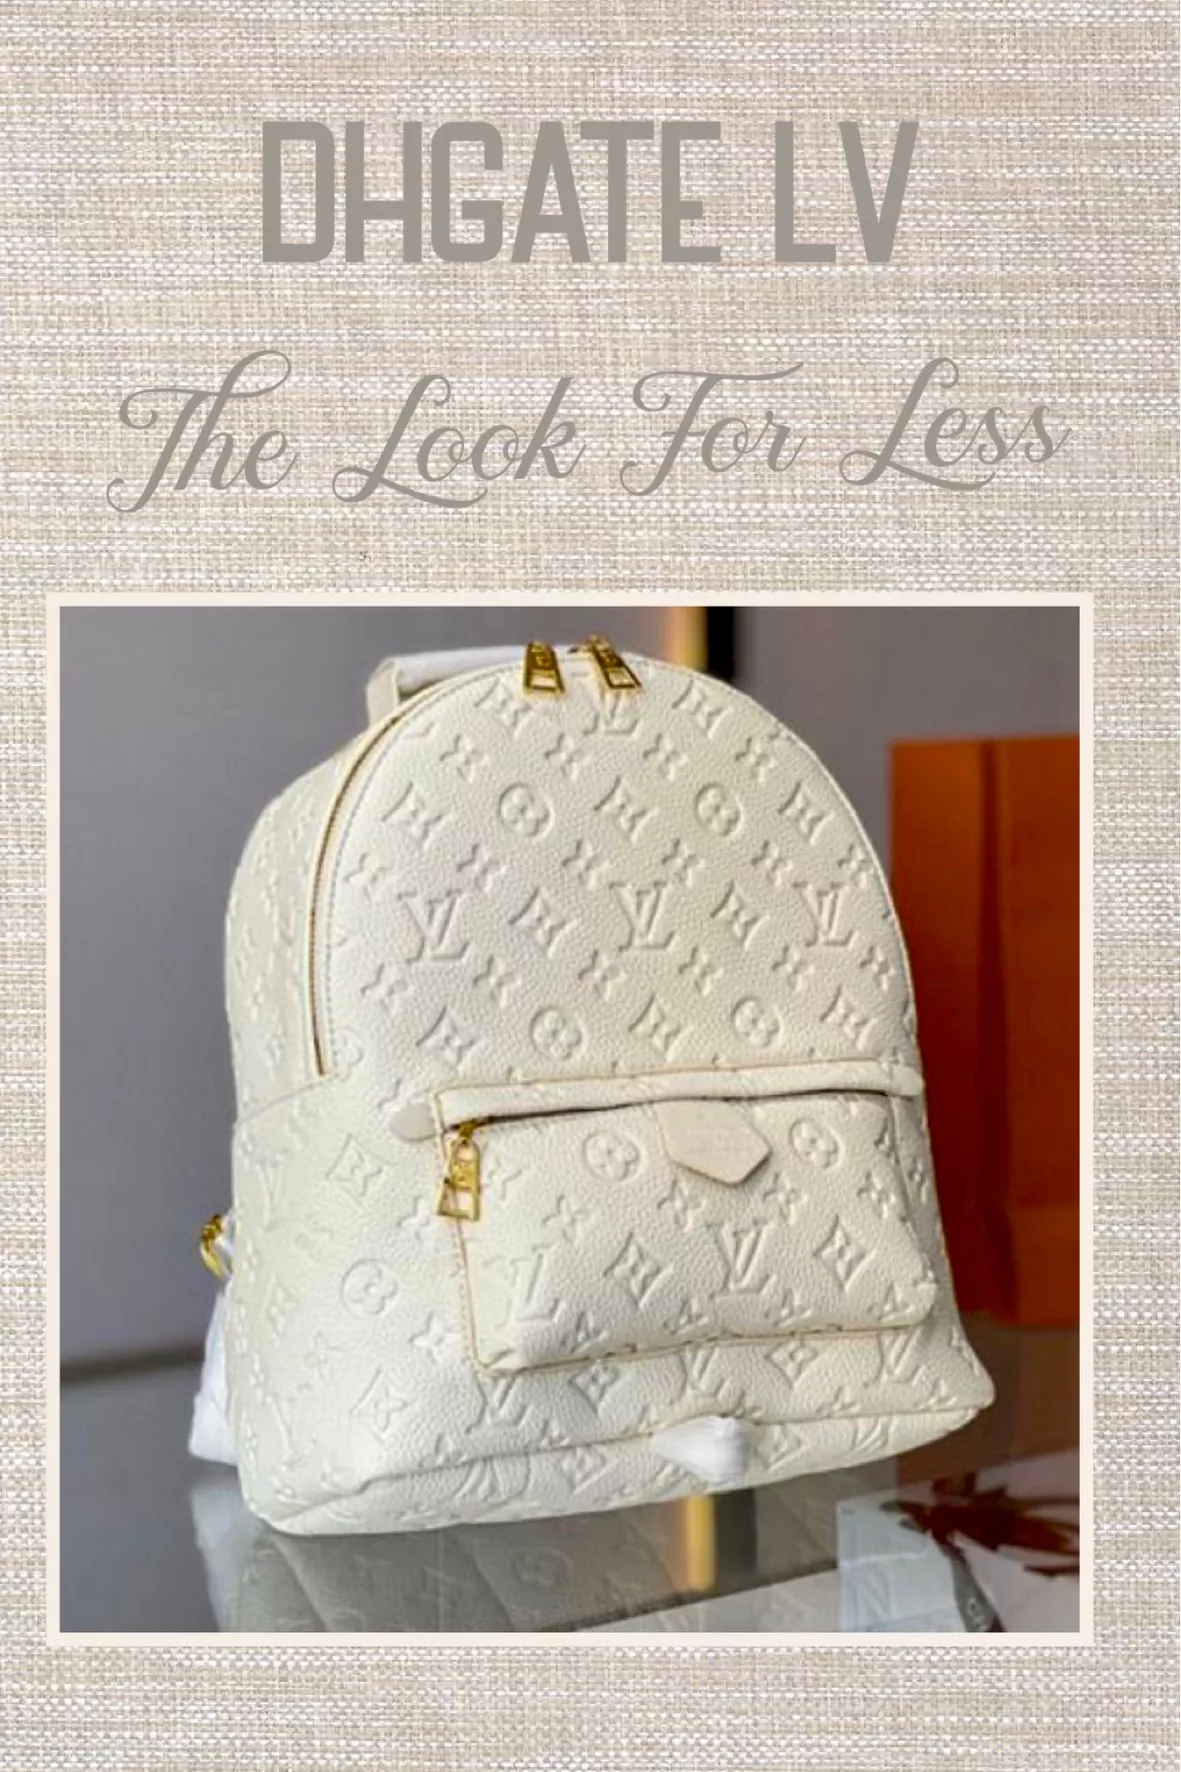 louis vuitton backpack dhgate